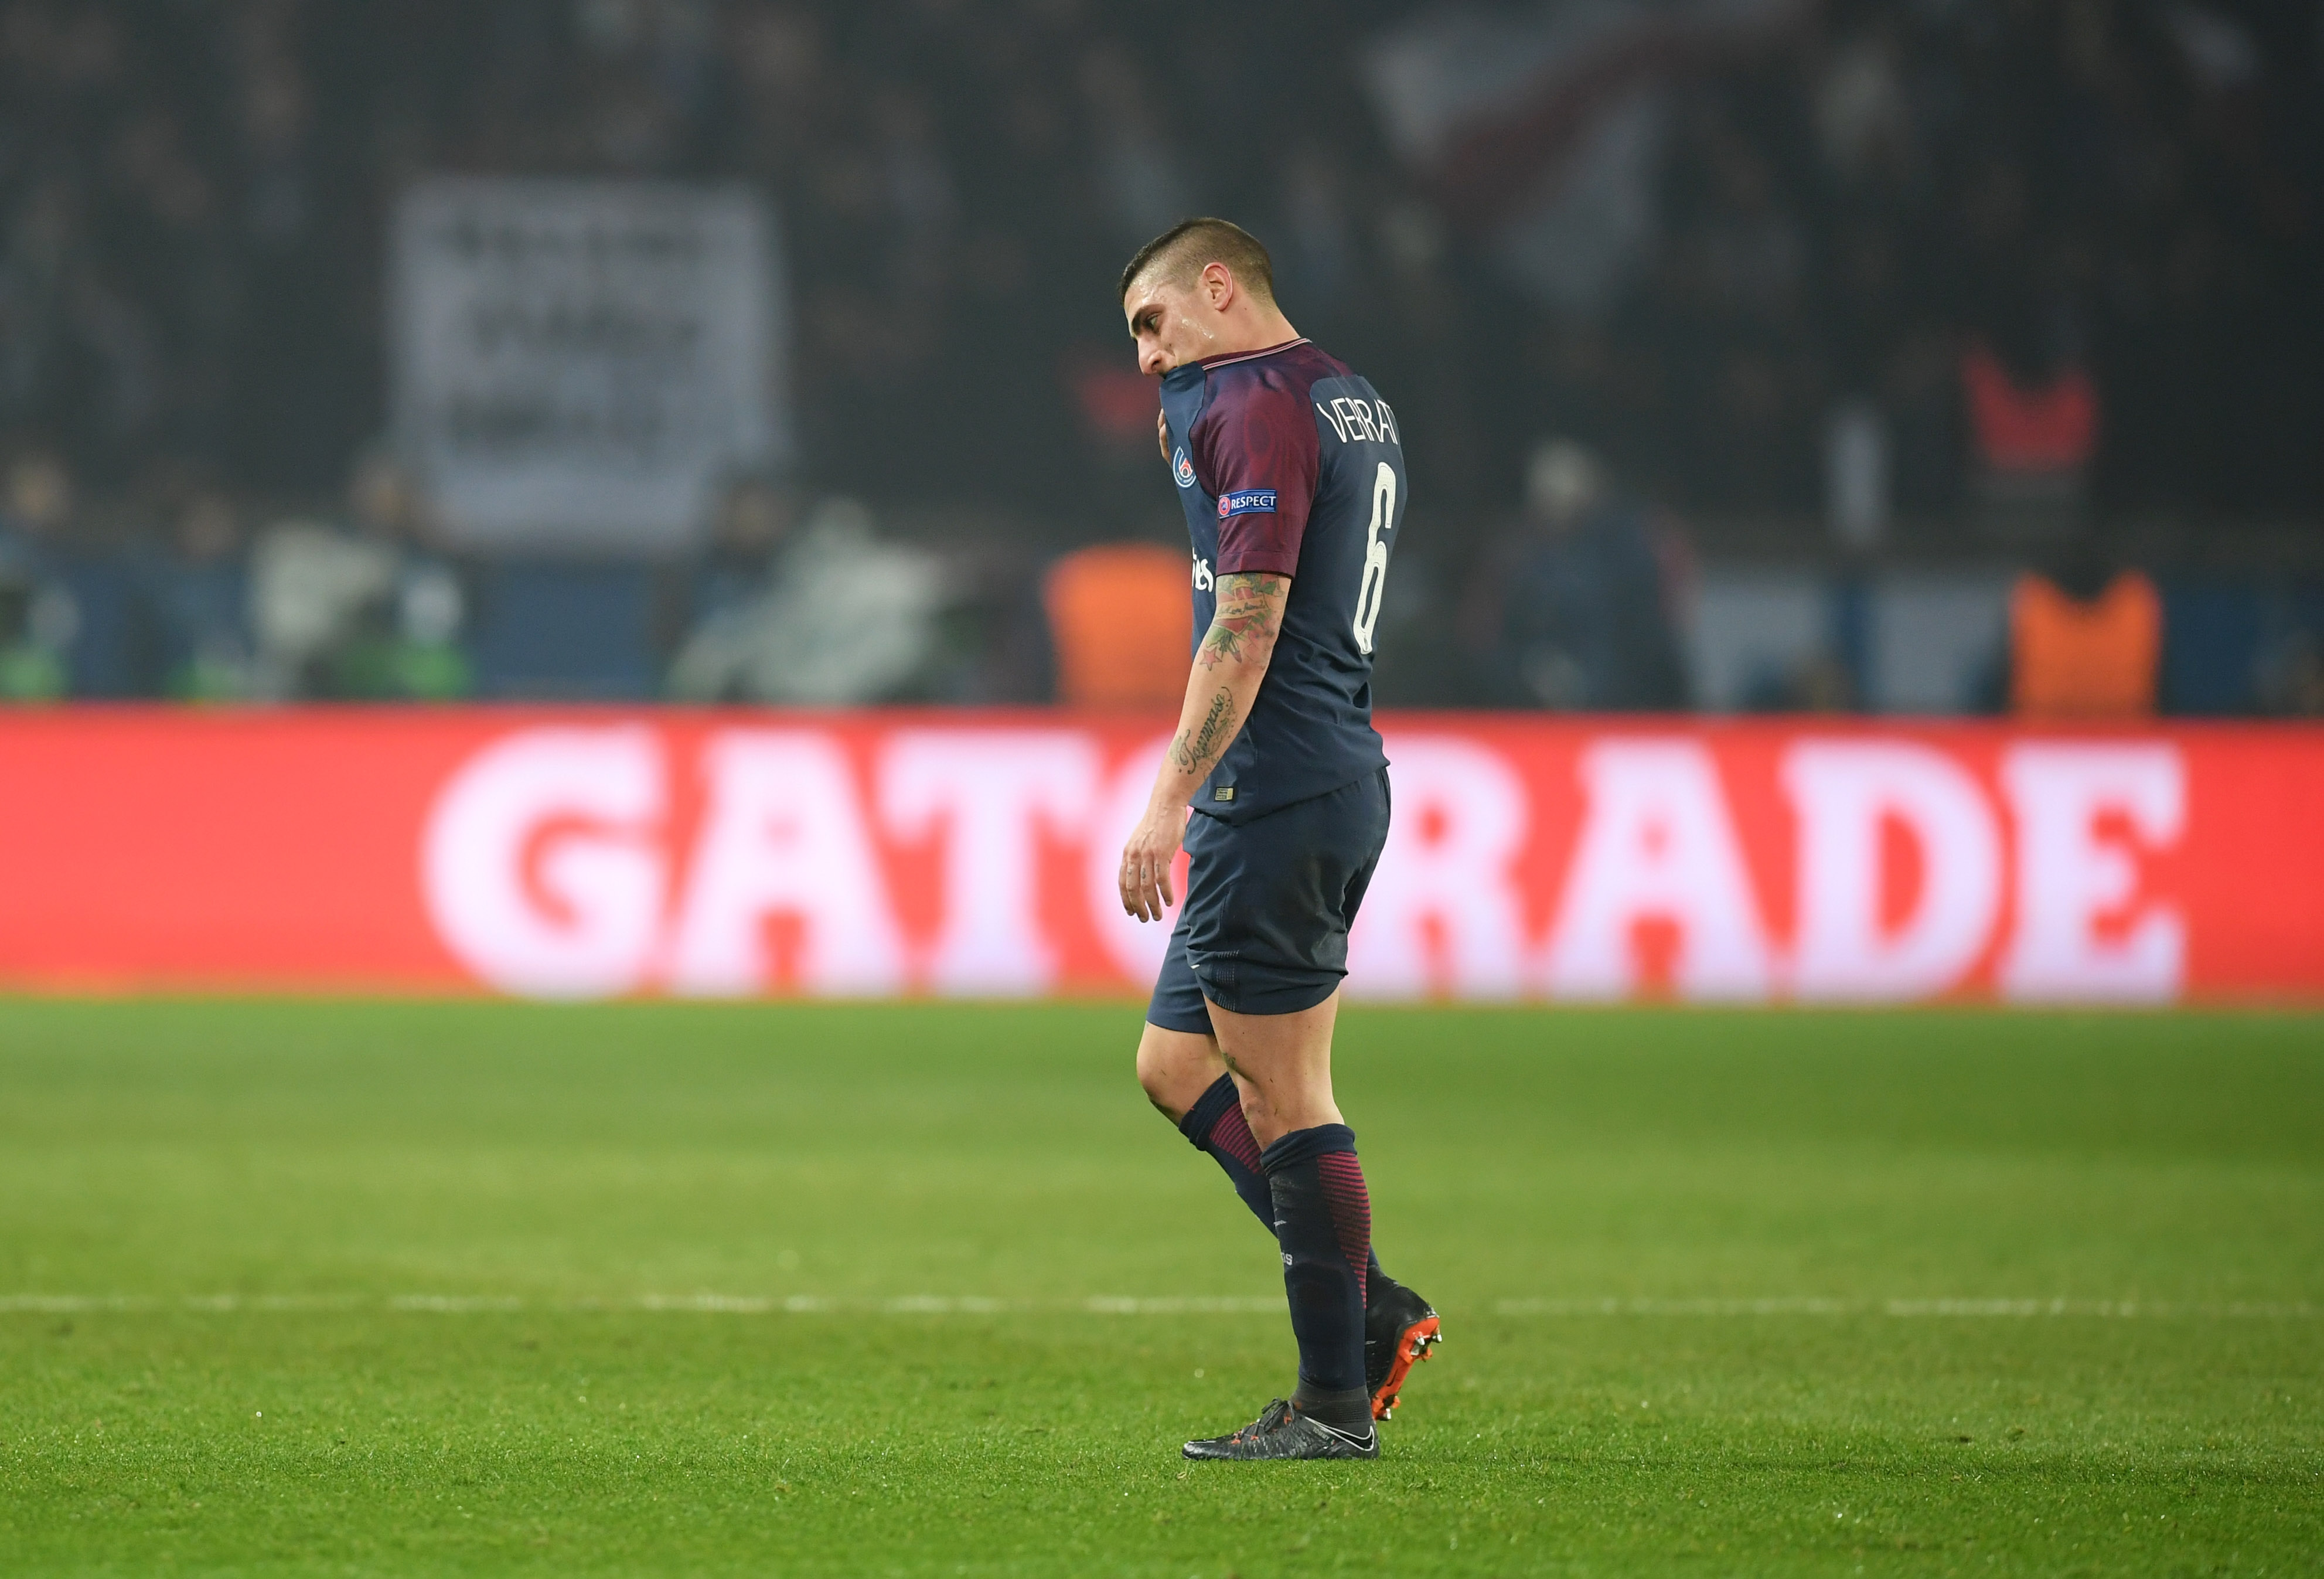 PARIS, FRANCE - MARCH 06:  Marco Verratti of PSG looks dejected as he is sent off during the UEFA Champions League Round of 16 Second Leg match between Paris Saint-Germain and Real Madrid at Parc des Princes on March 6, 2018 in Paris, France.  (Photo by Matthias Hangst/Getty Images)